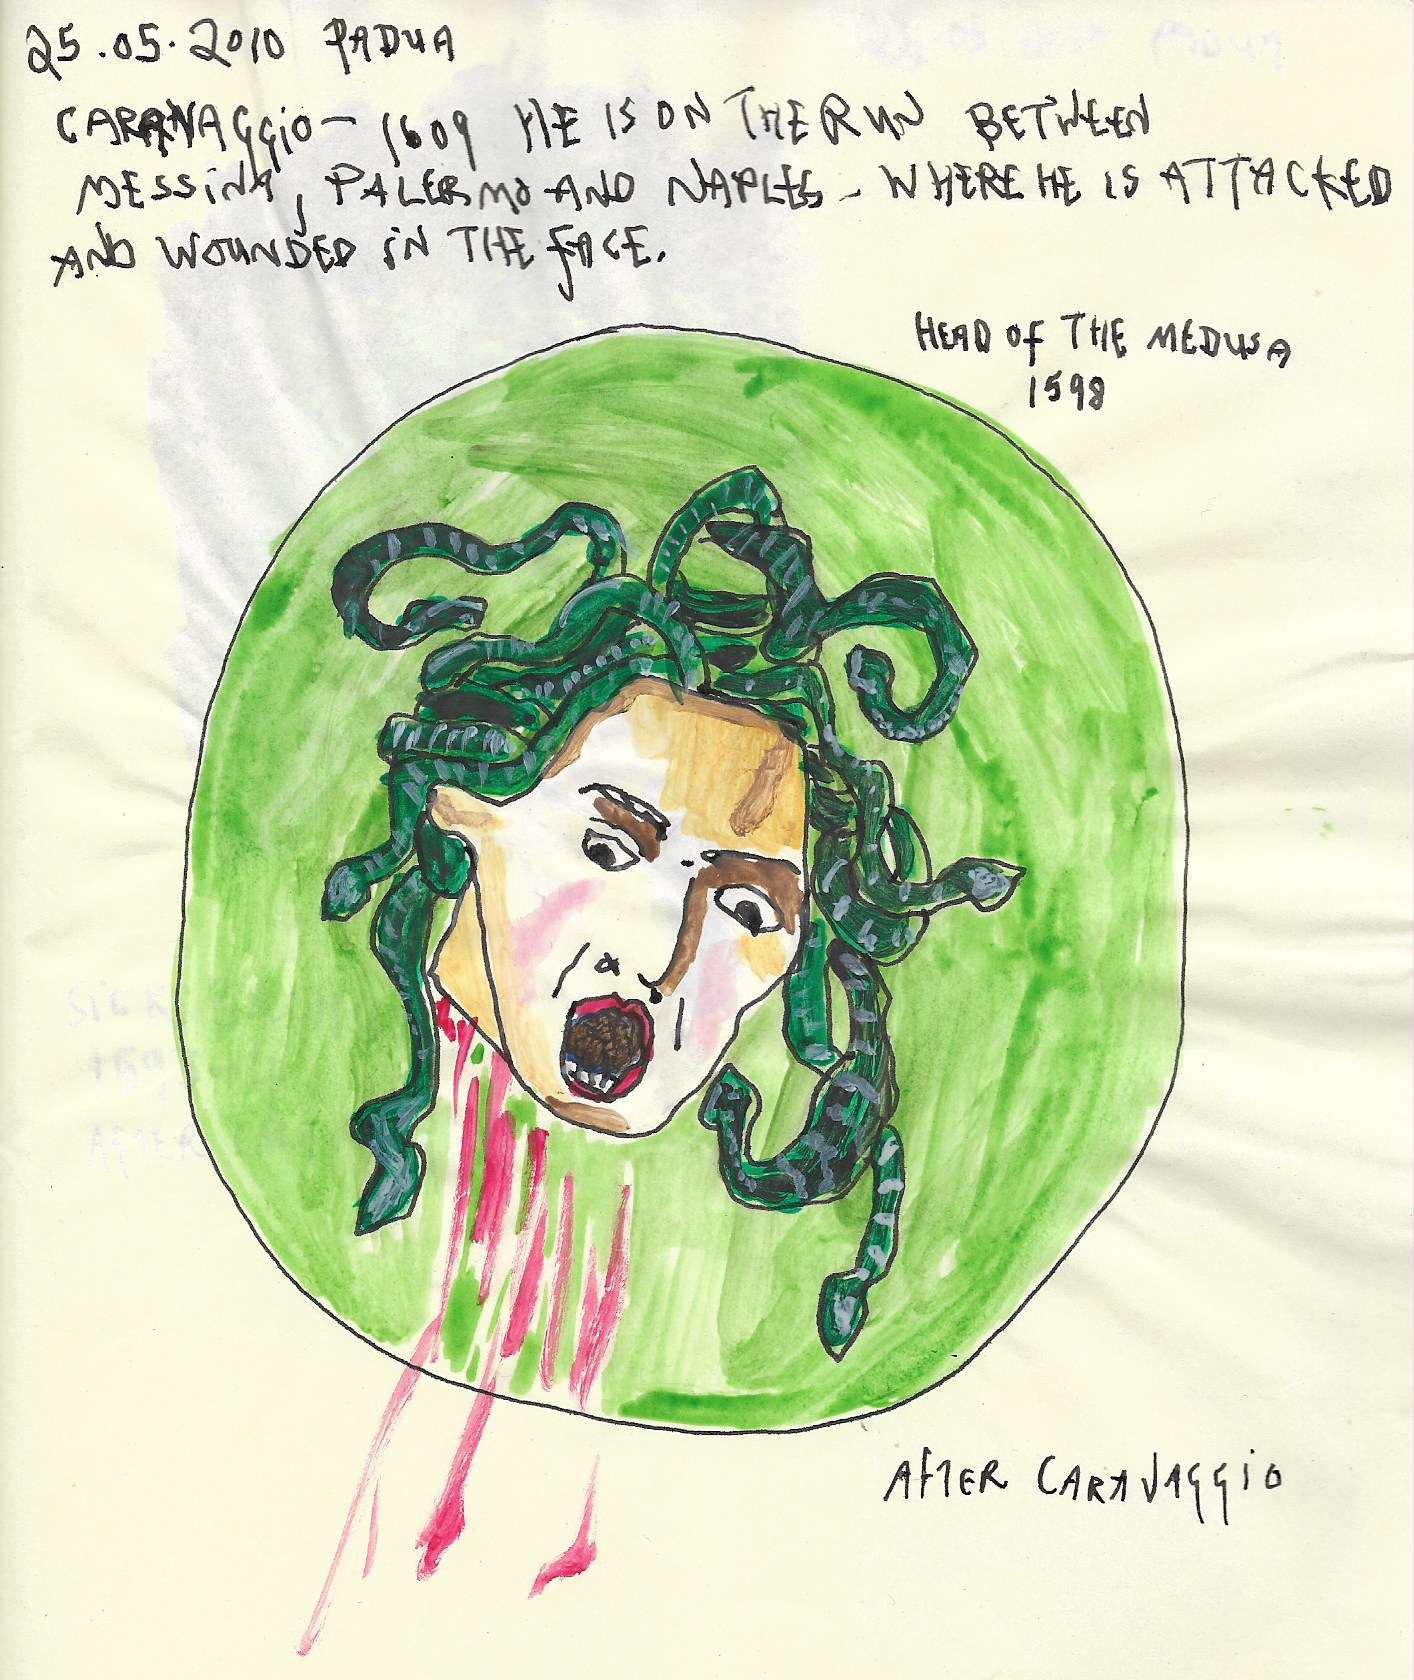 Drawing of Medusa's head (from Greek mythology winged human female with living venomous snakes in place of hair) on a circle of green.